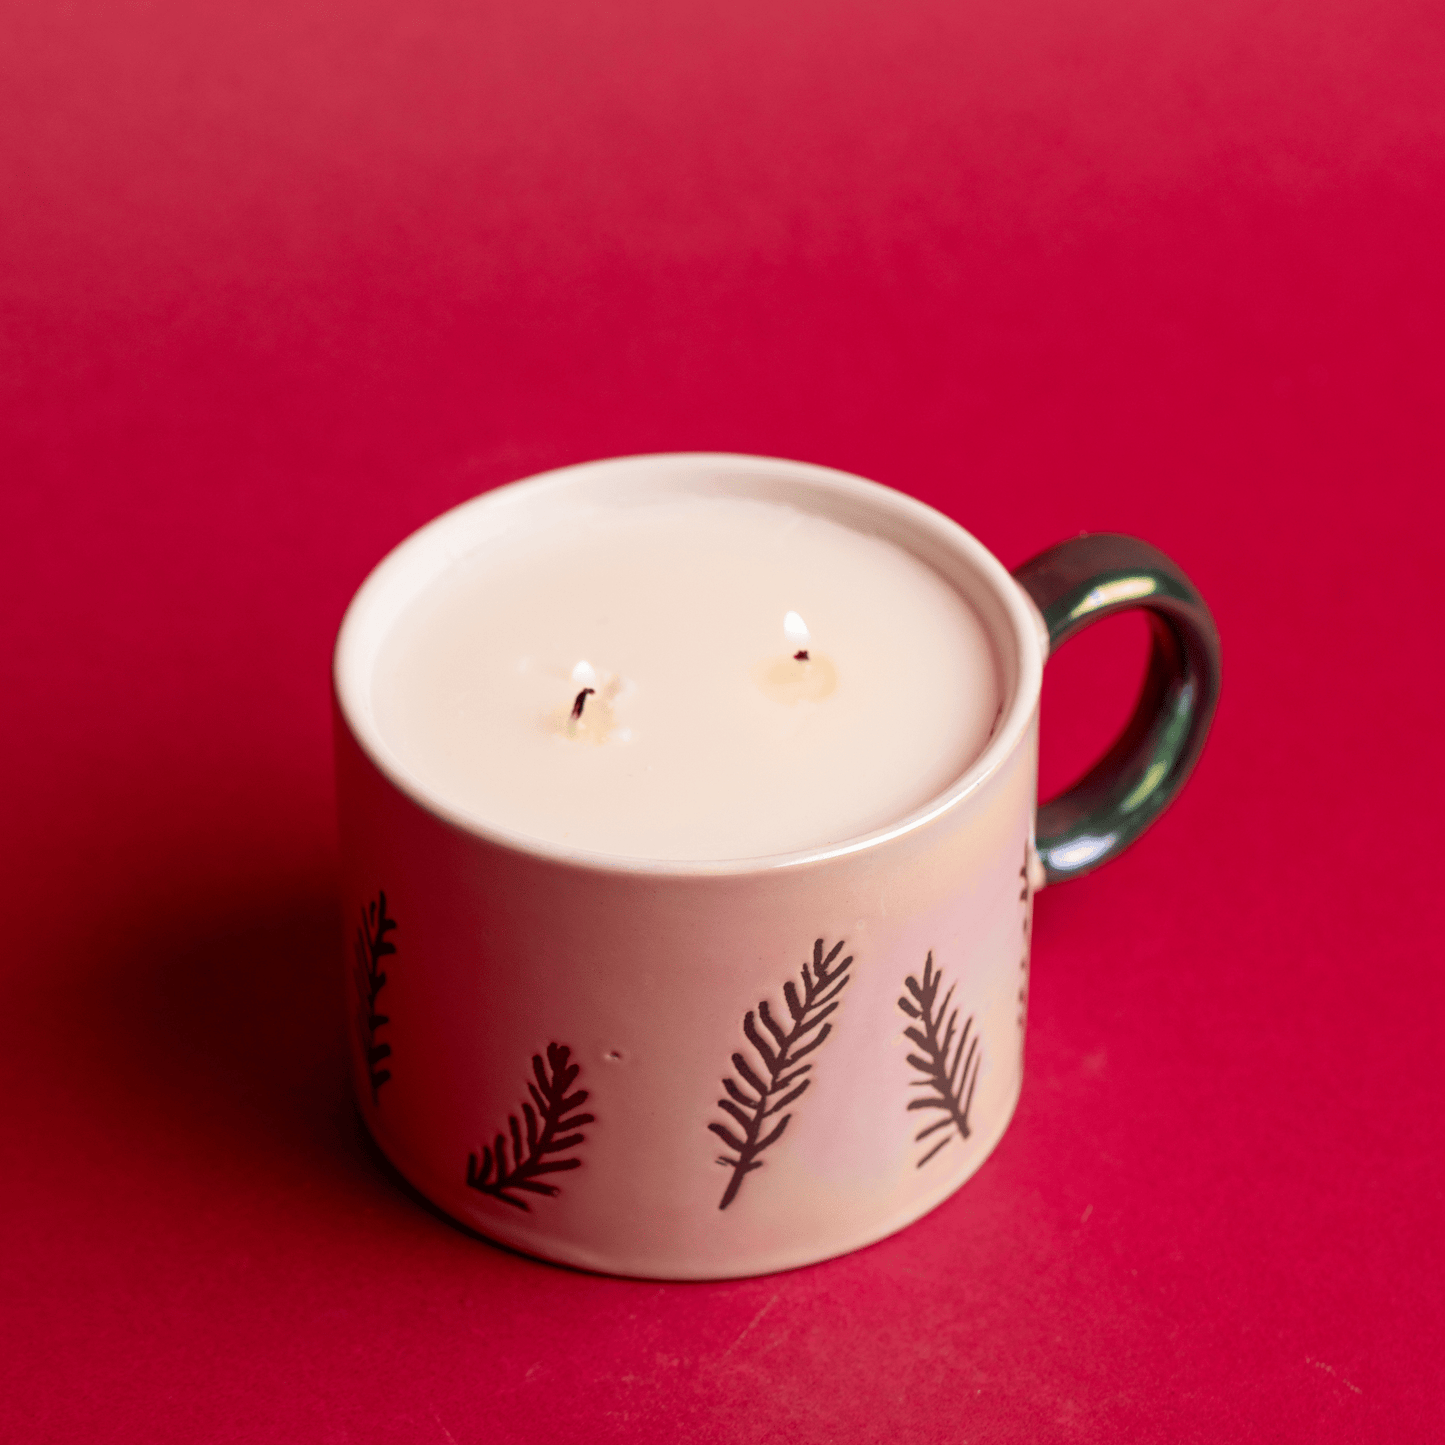 Top view of a lit Cypress & Fir - 8oz White Ceramic Mug candle on a red background